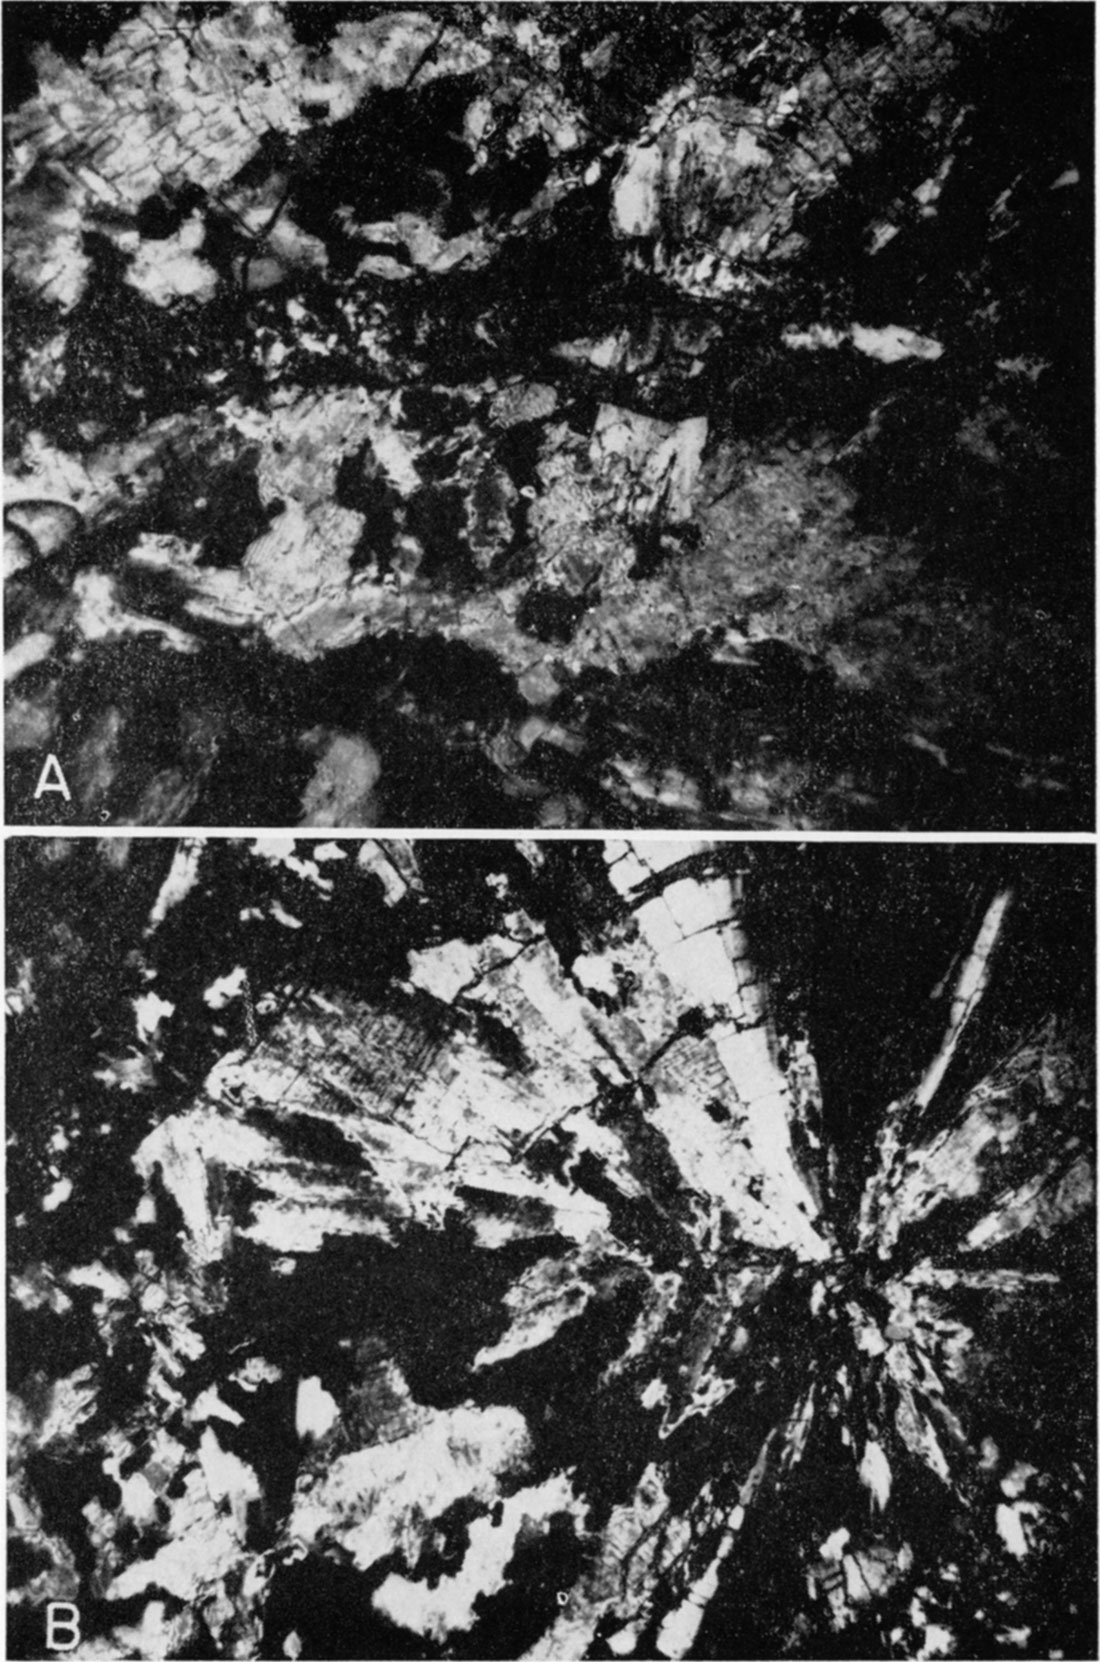 Two black and white photos; photomicrographs of gypsum and anhydrite.